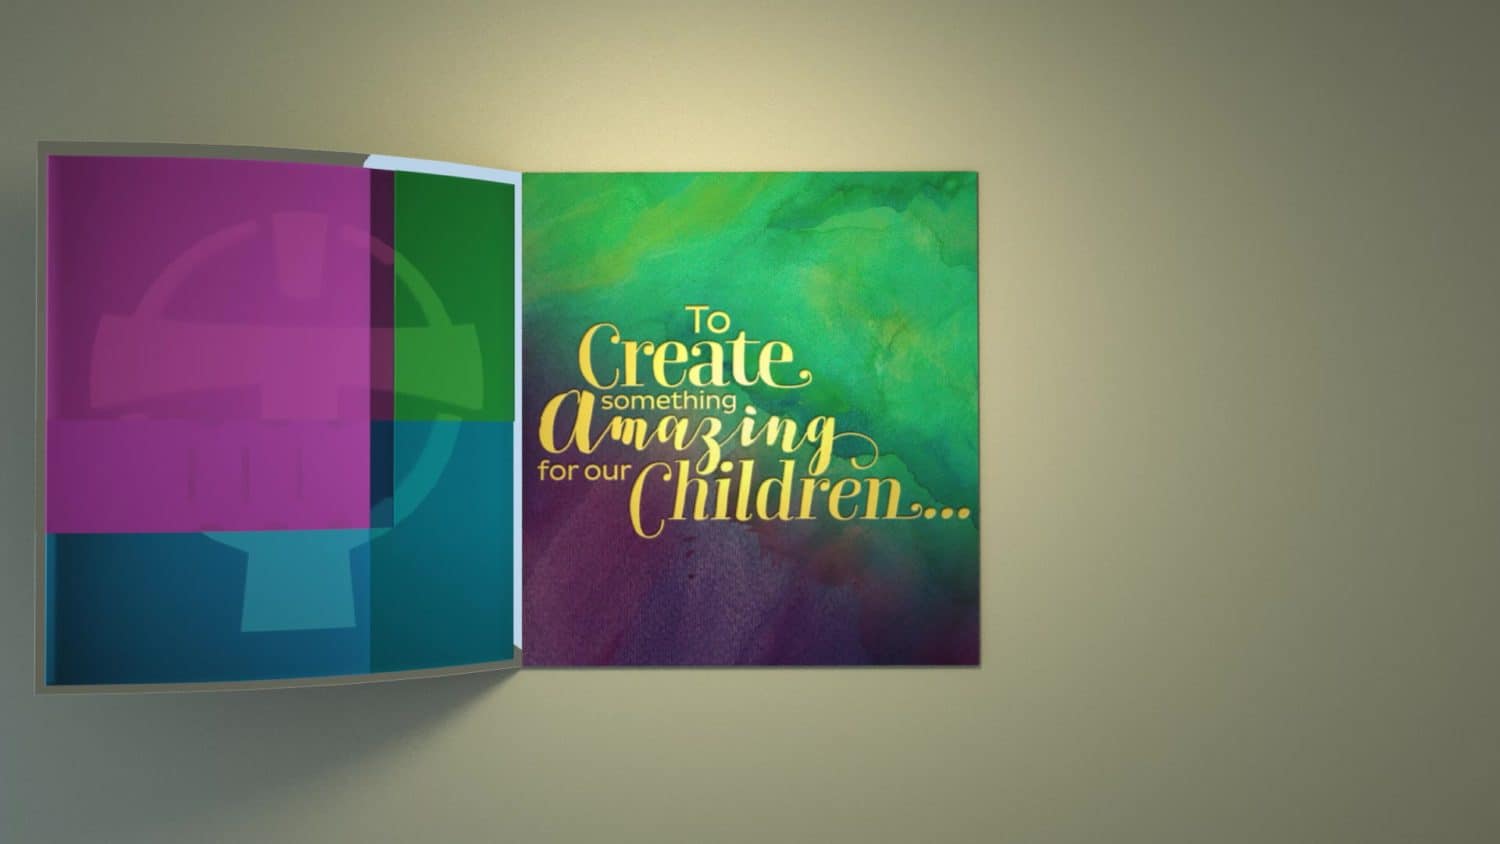 A colorful animated story book opens with the our lady of the lake logo and cursive typography in gold